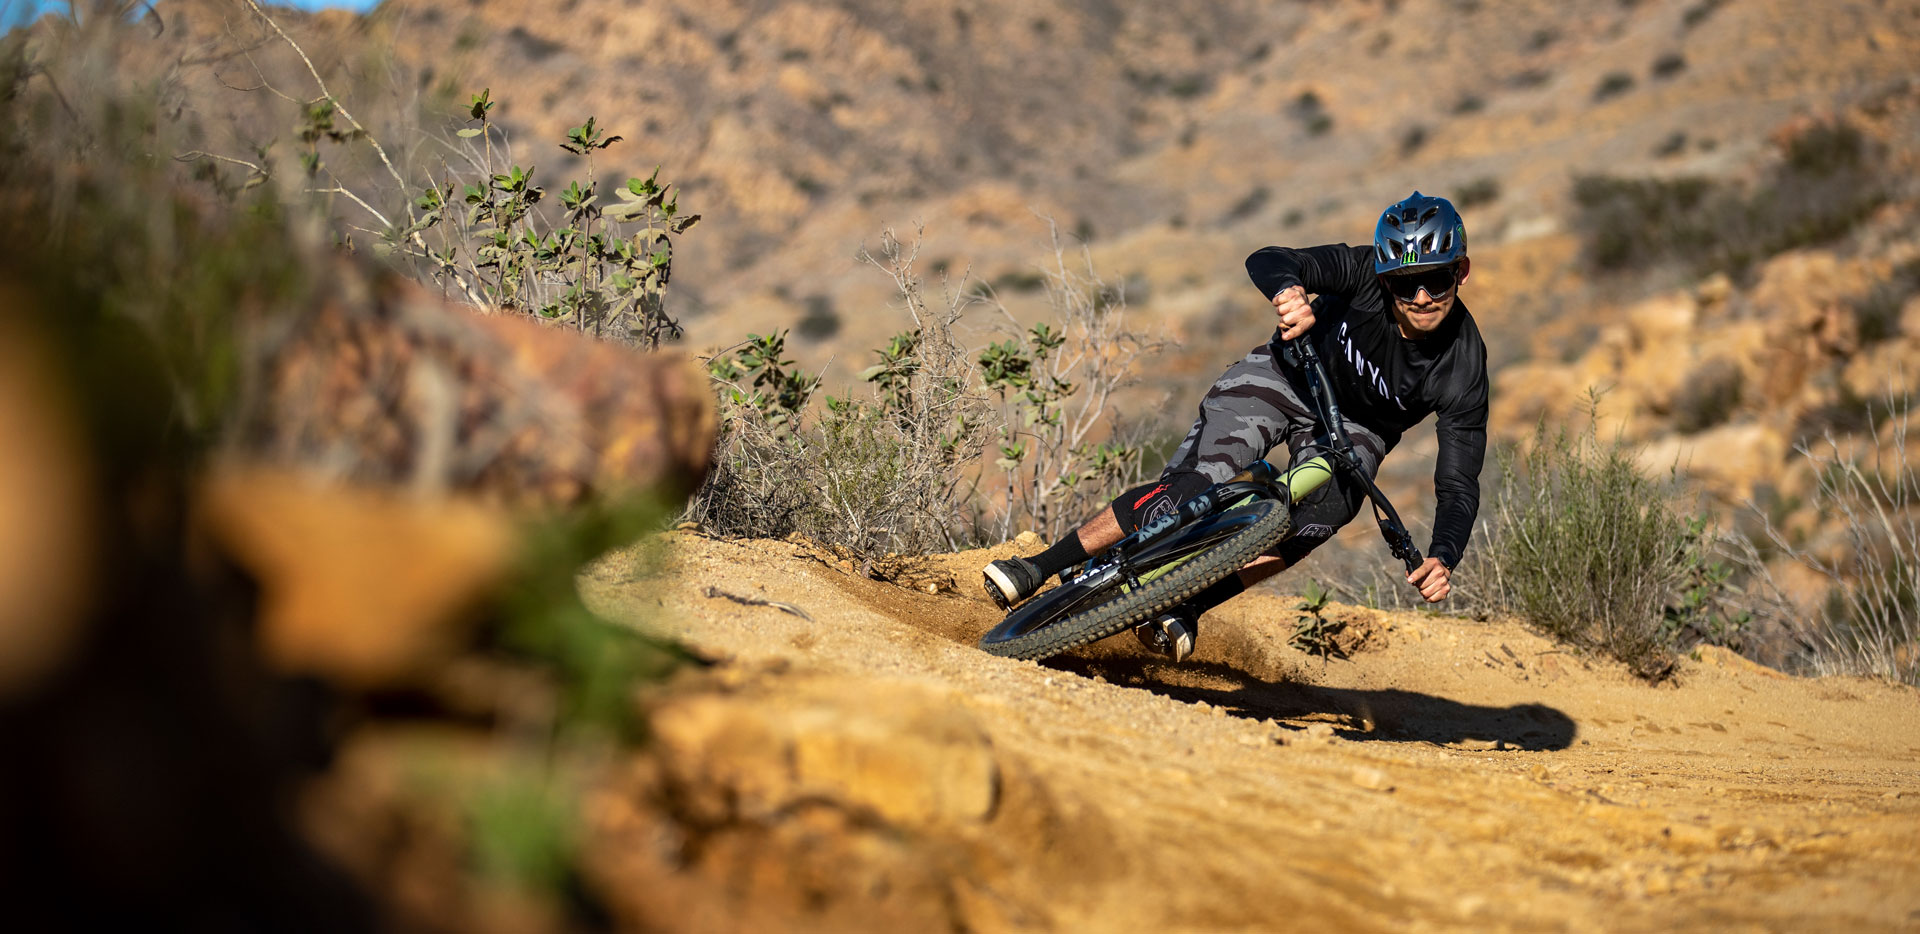 The new Canyon Spectral 125